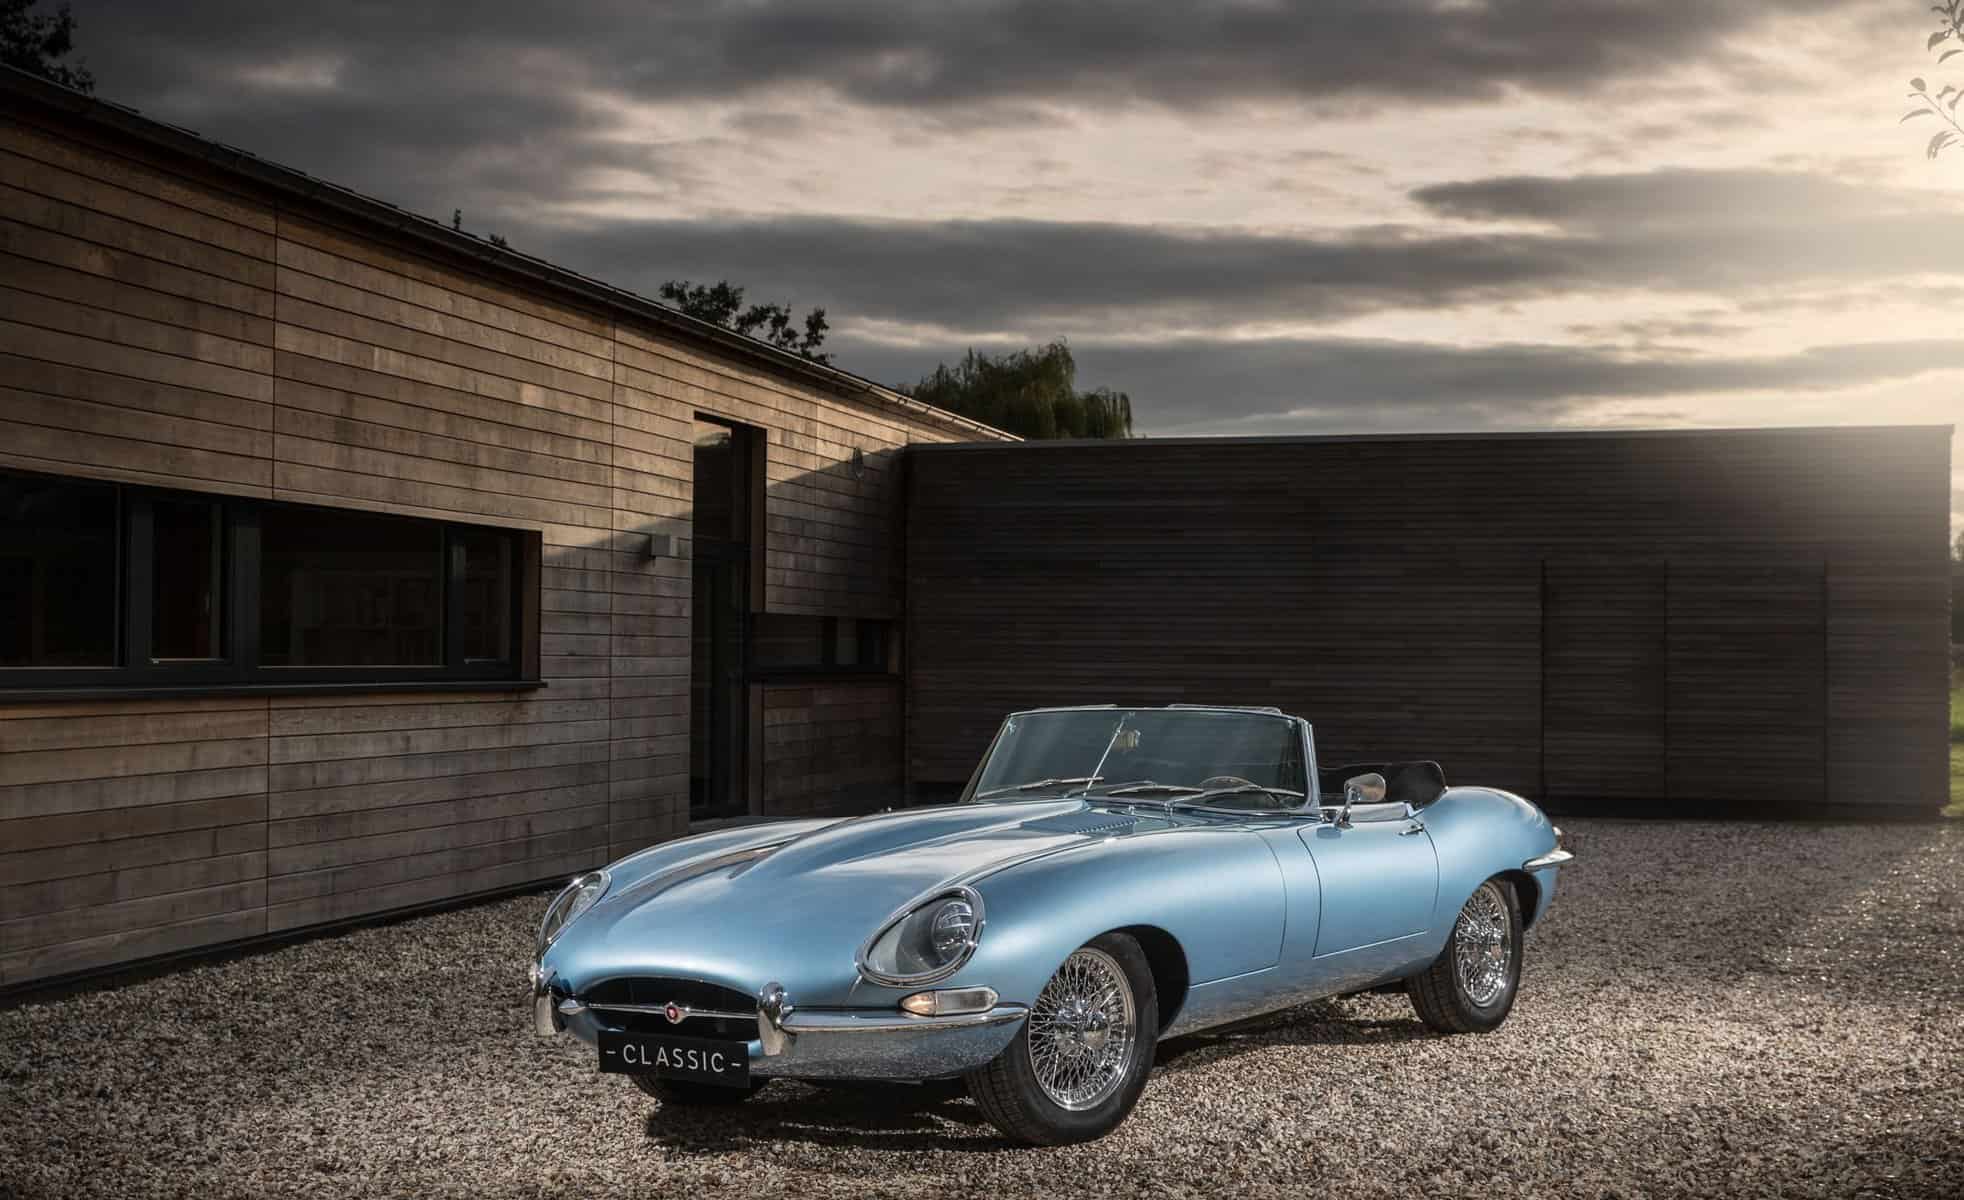 1960s Cars: The 25 Most Iconic Classic Cars